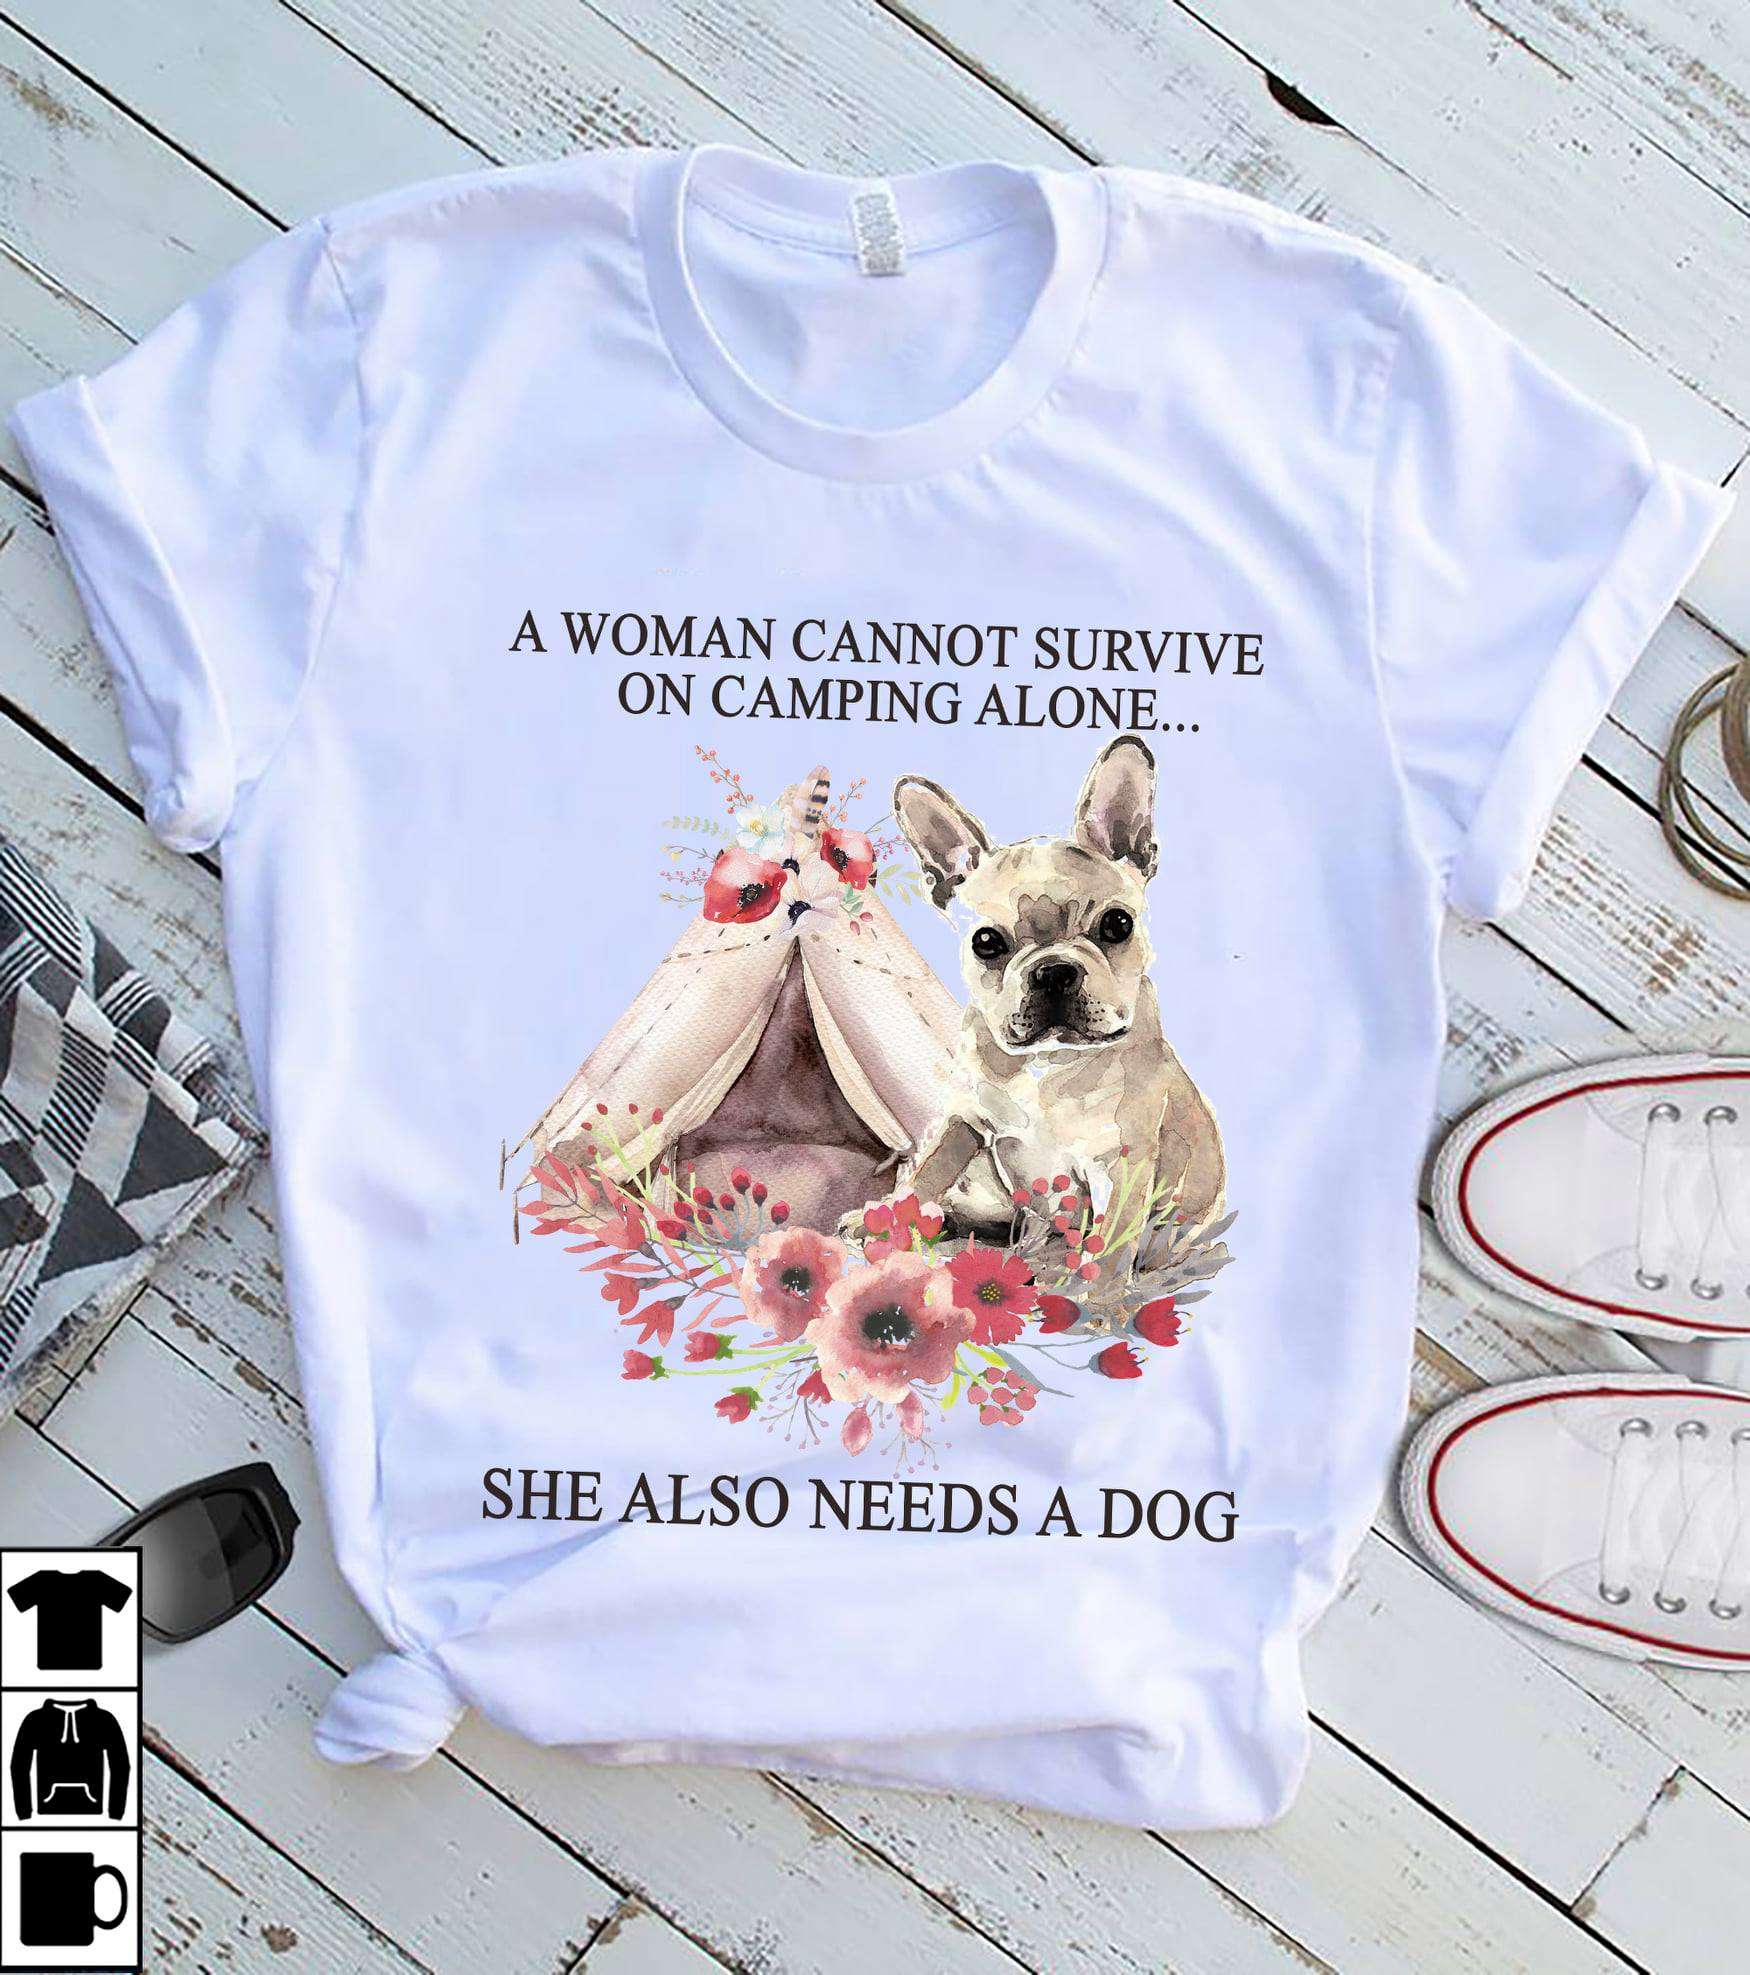 Camping French Bulldog - A woman cannot survive on camping alone she also needs a dog